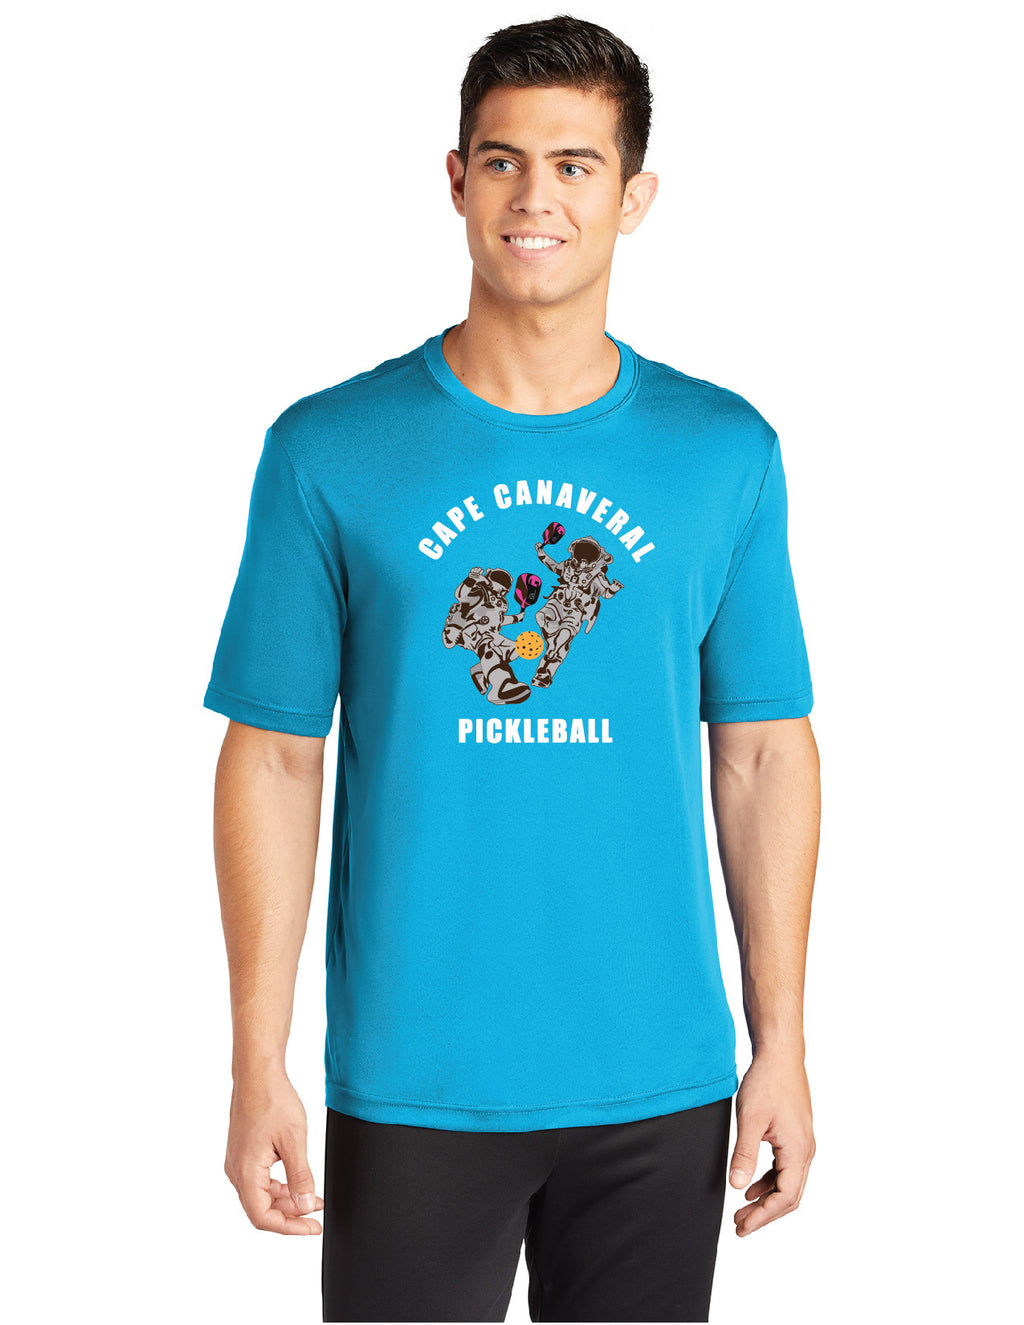 Men's Competitor Short Sleeve 'Cape Canaveral' Tee